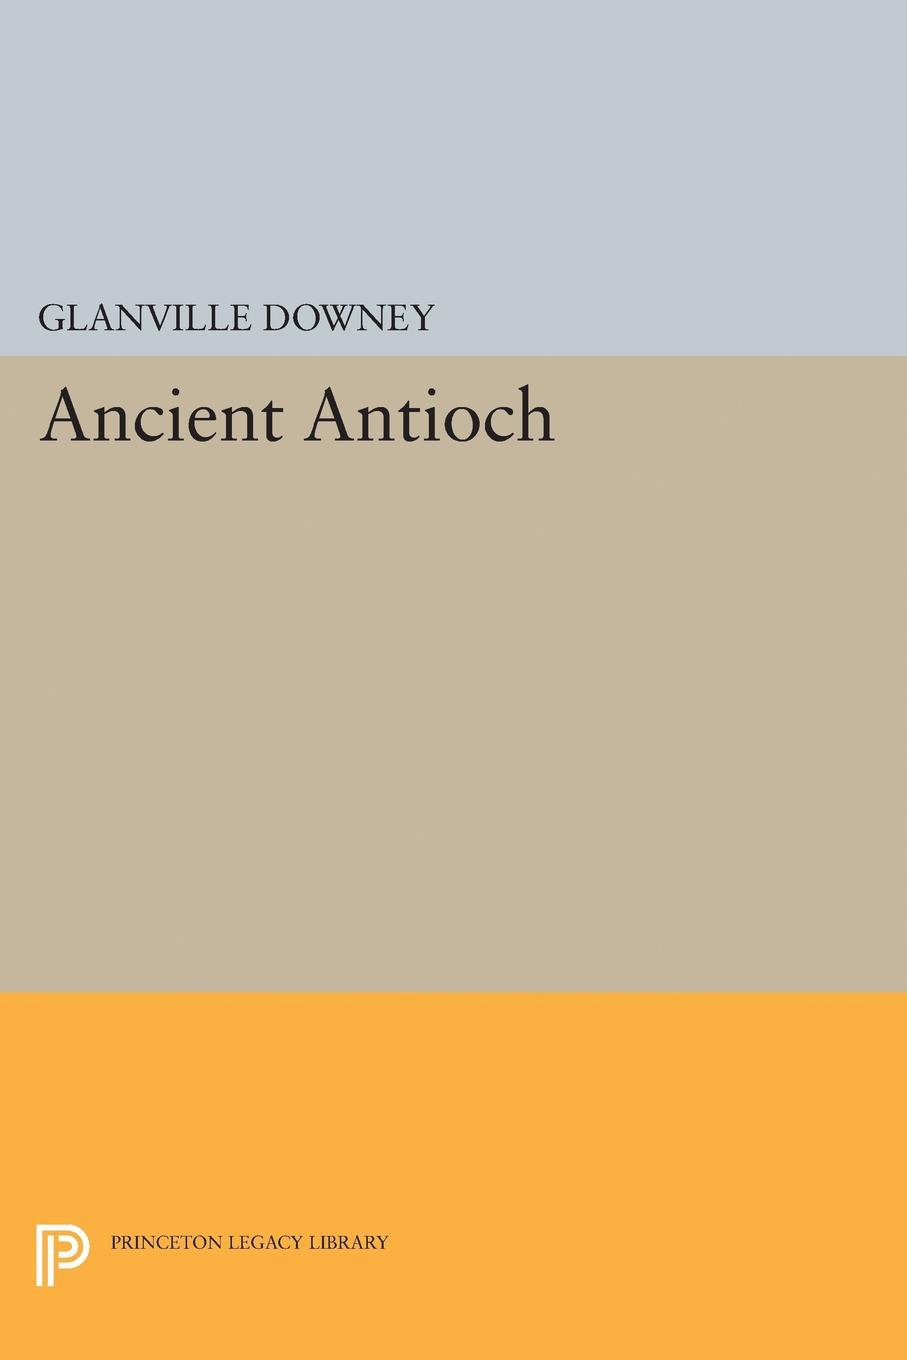 From Antioch to Alexandria: Recent Studies in Domestic Architecture -  Archeobooks: 9788387496142 - AbeBooks